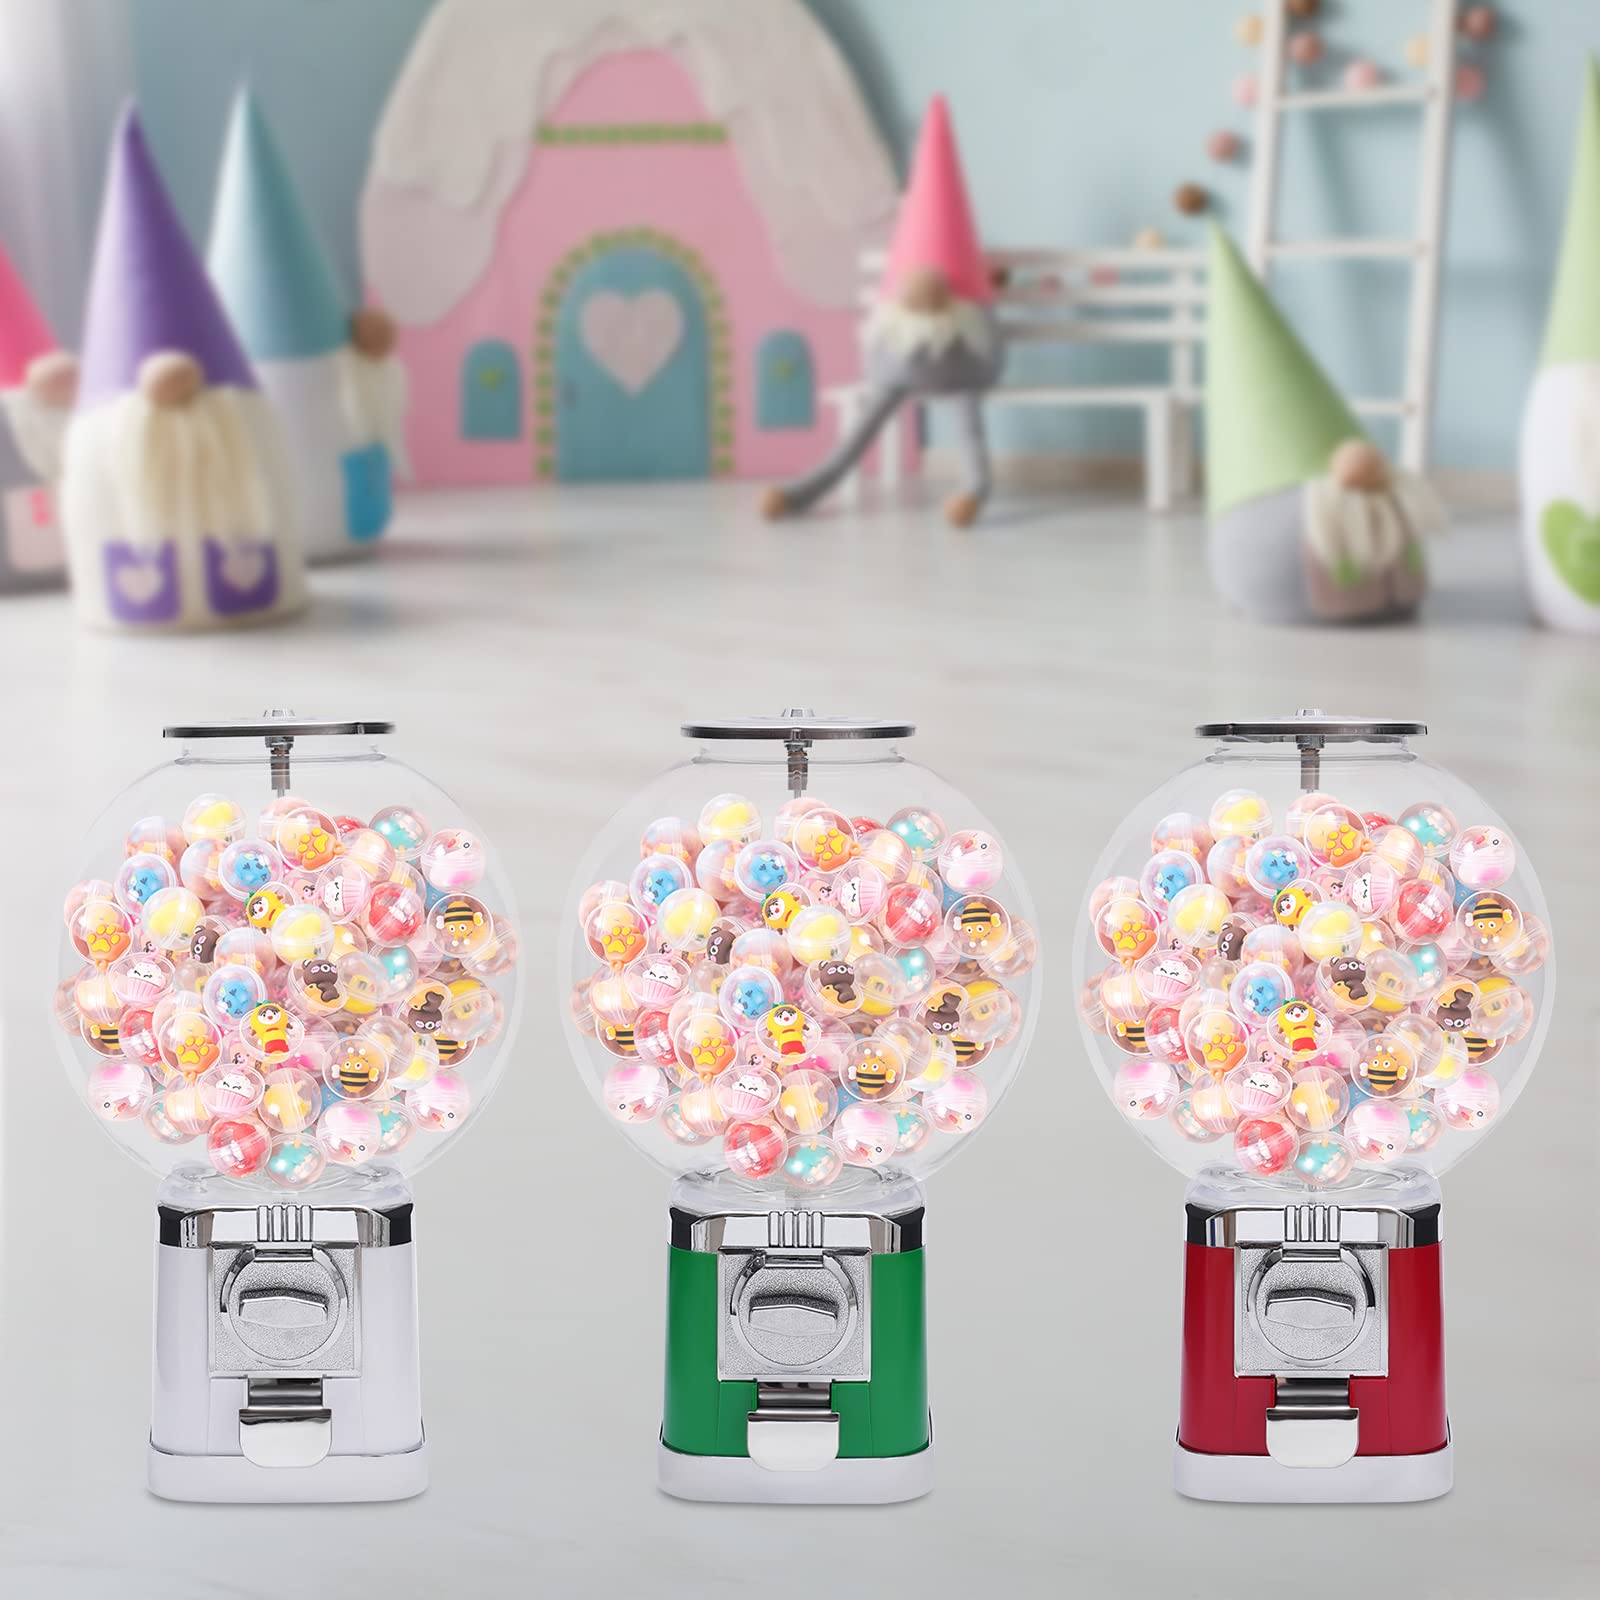 MhdunueSK Big Bubble Gumball Machine,Vending Machines for Business,Machine Capacity 500 Pieces 1.26inch Ball or Candy,for Selling Small Capsule Toys Candy (LM-202B White)